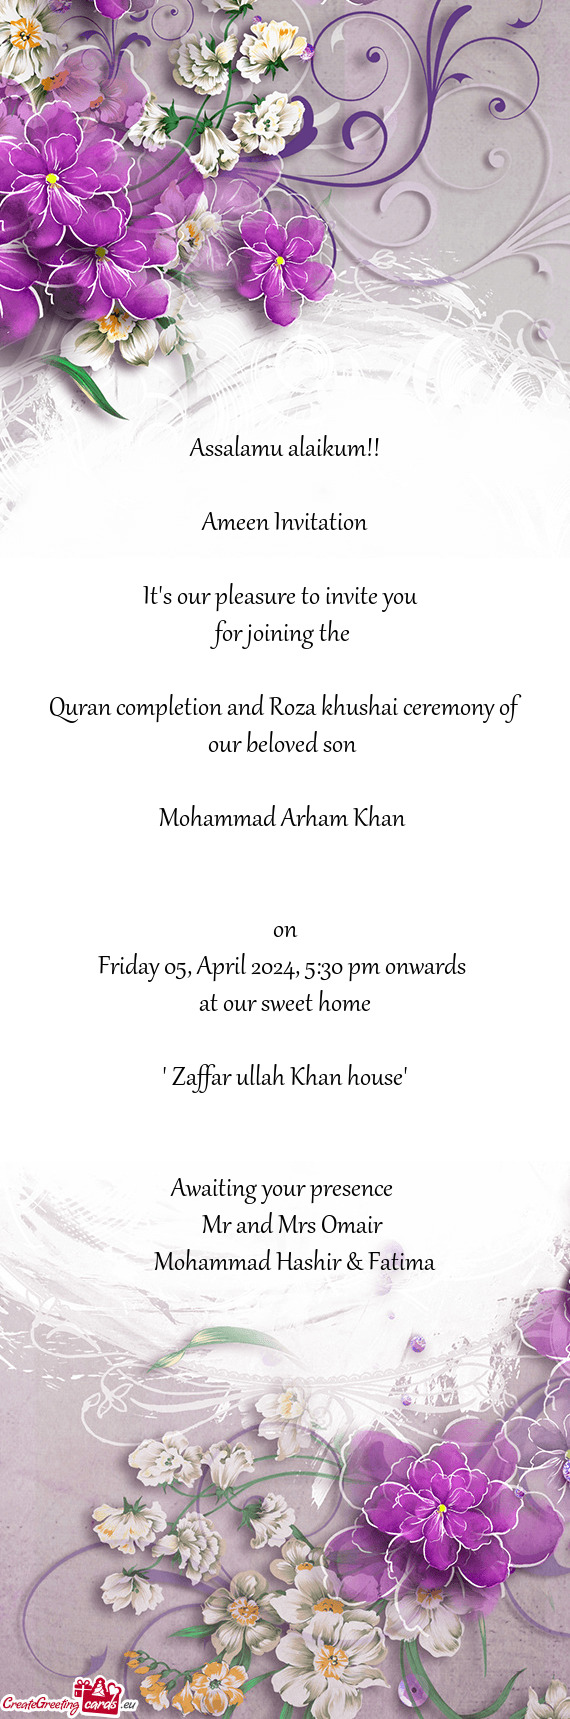 Quran completion and Roza khushai ceremony of our beloved son